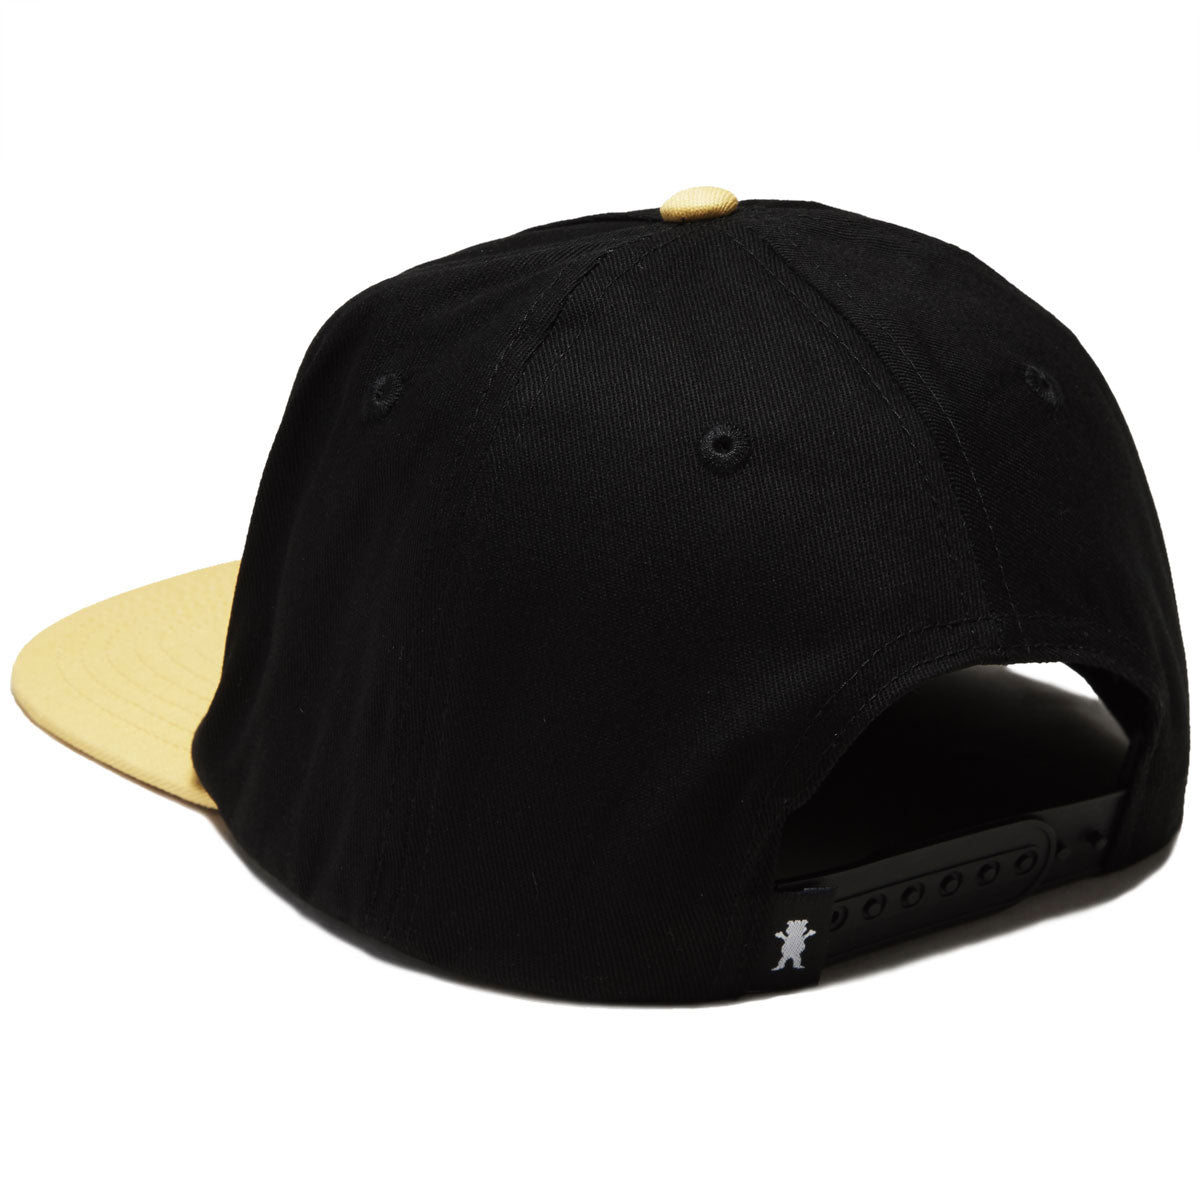 Grizzly Midfield Unstructured Strapback Hat - Black image 2